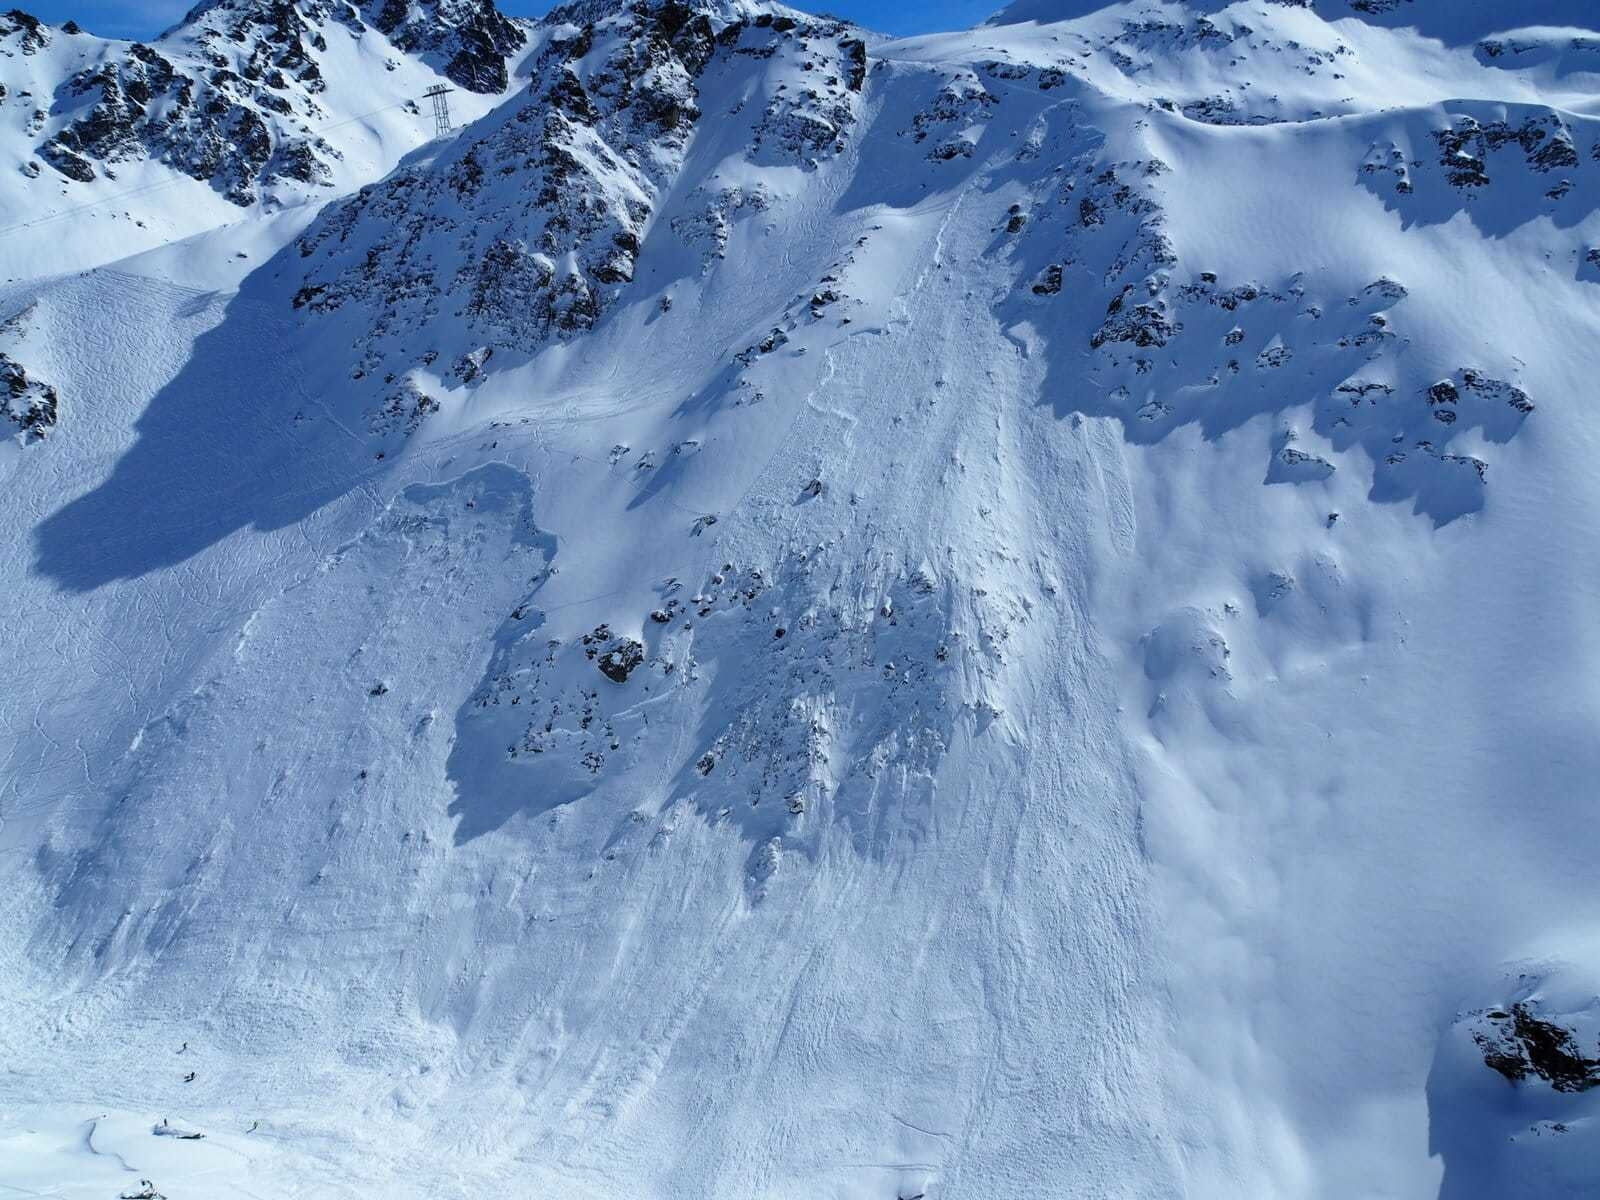 The enormous size of Wednesday’s fatal avalanche can be seen in comparison to Monday’s picture.